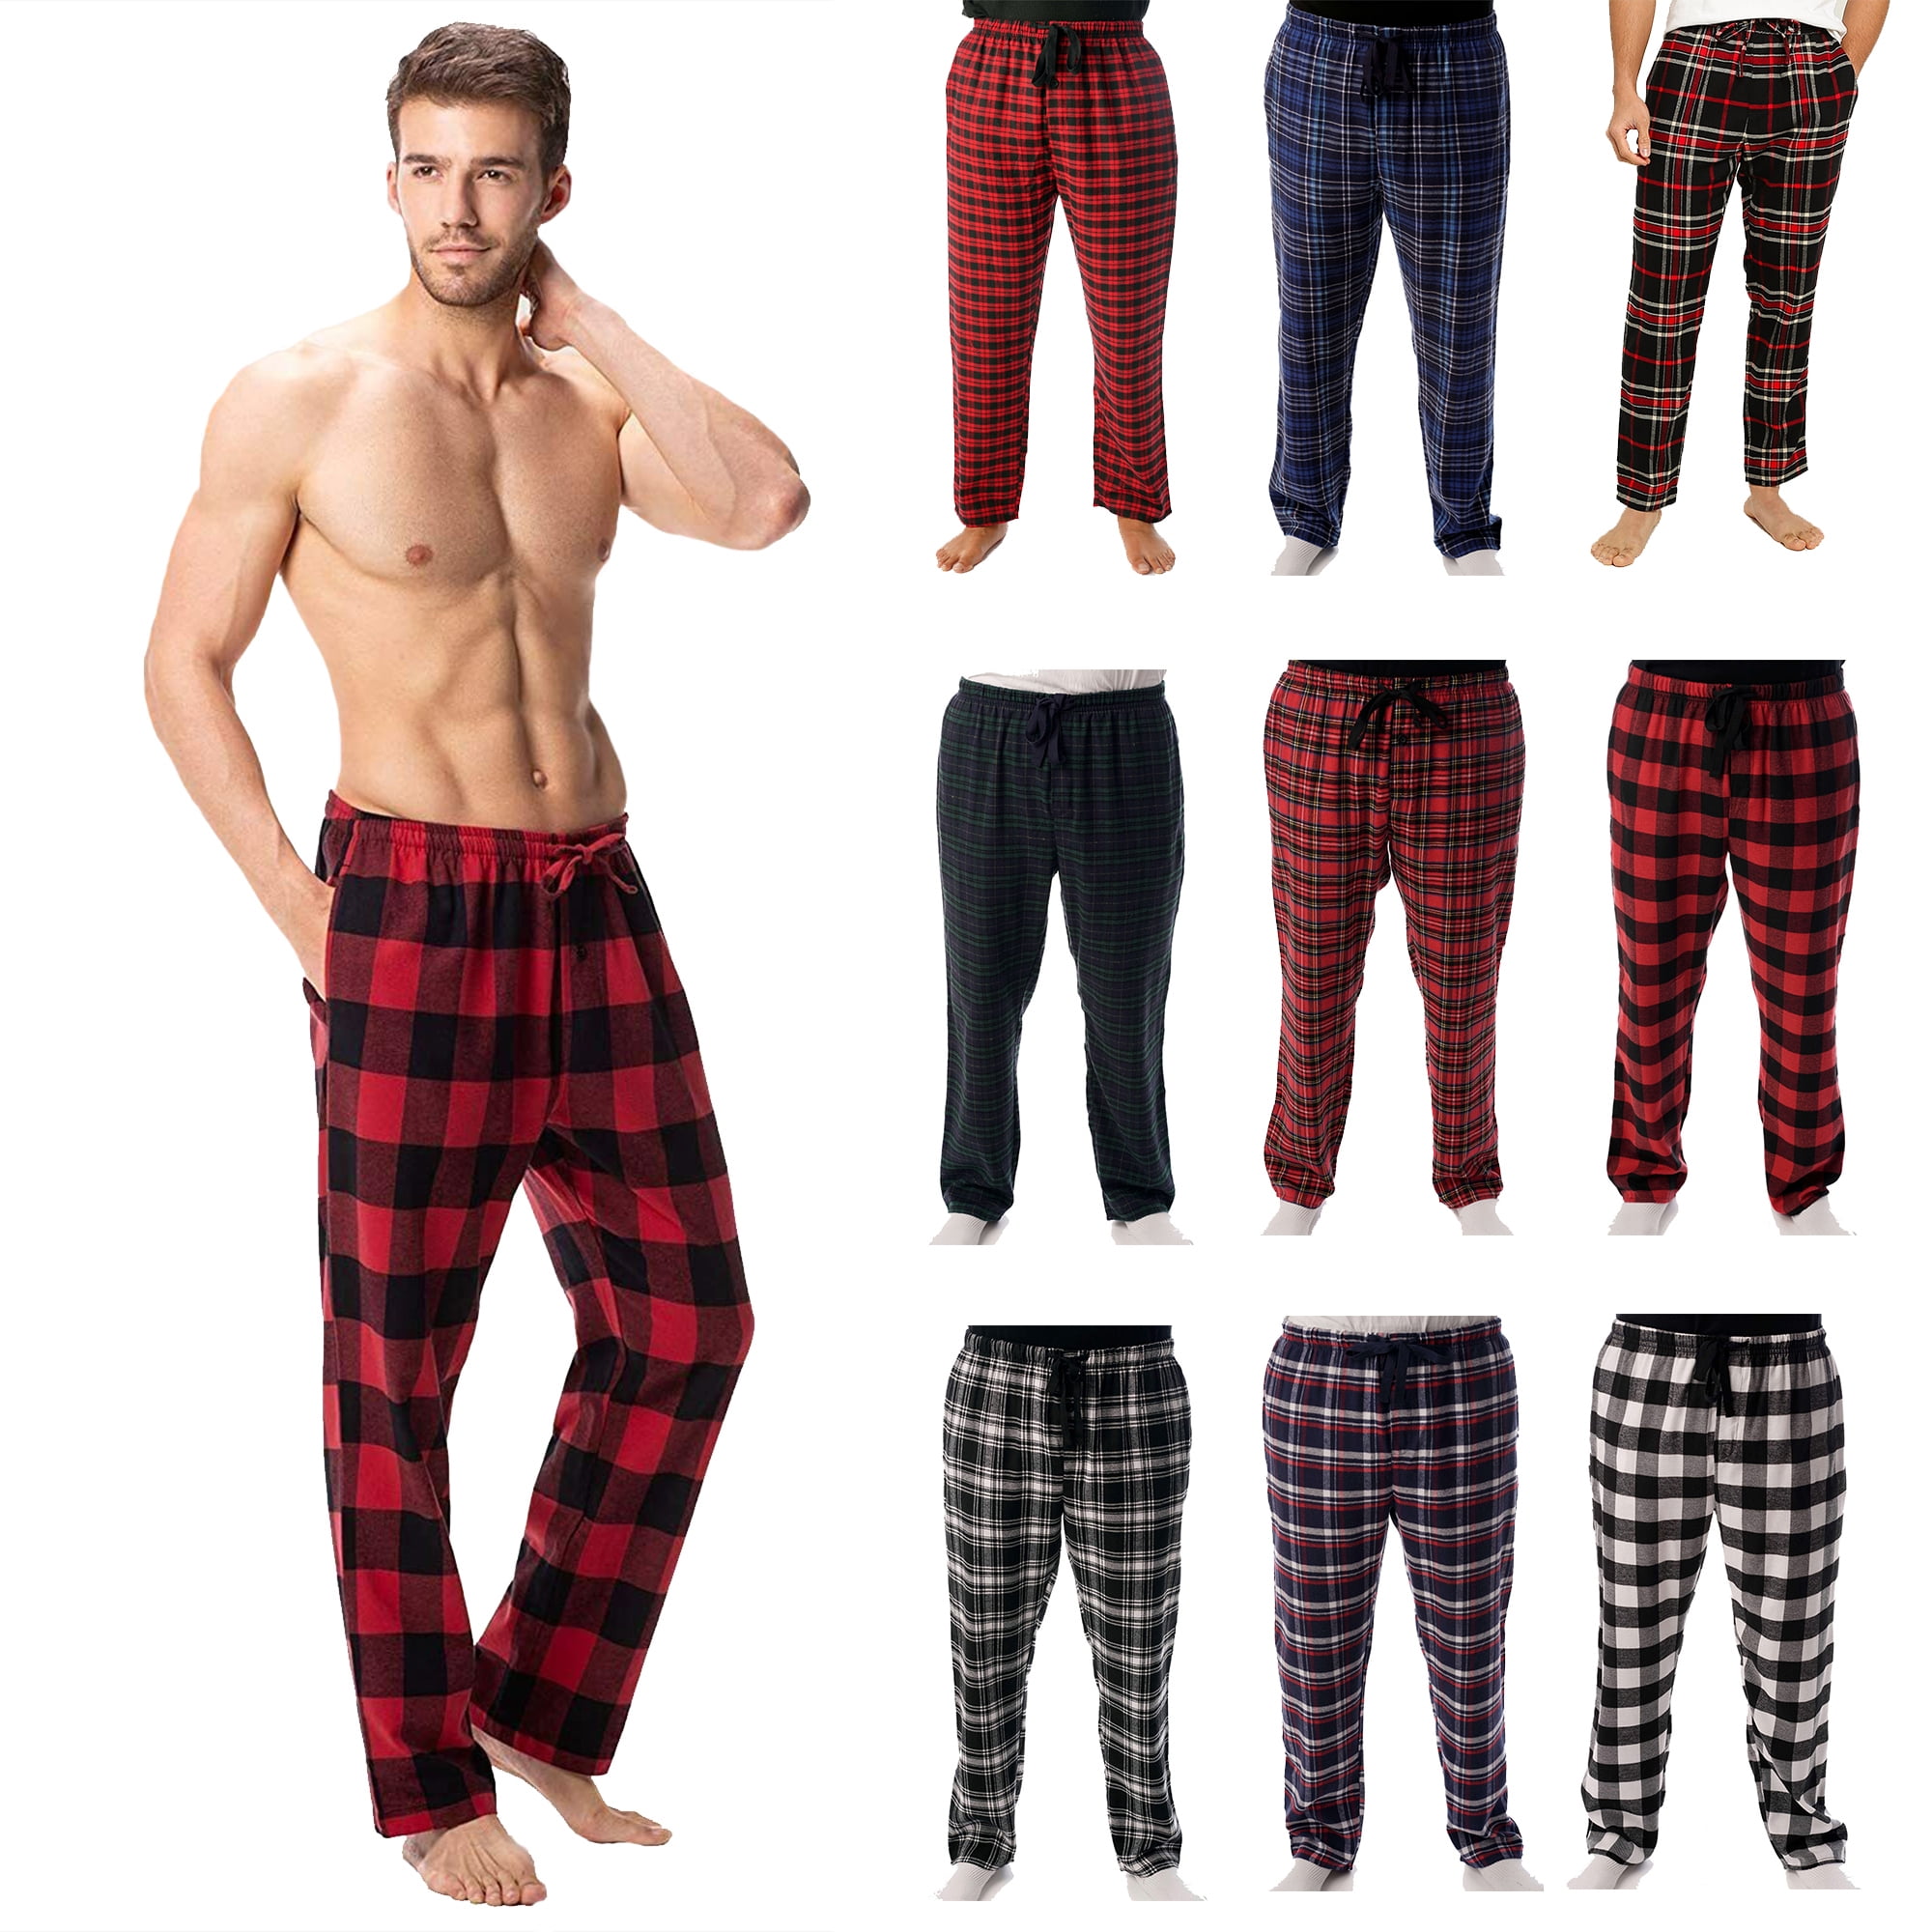 Radyan Men's Soft Stretchy Pajama Pants. Cotton Nightwear Pajama. Boy's  Bottom Pant. Assorted Colors, Pack of 2 - Best gift for boy's 